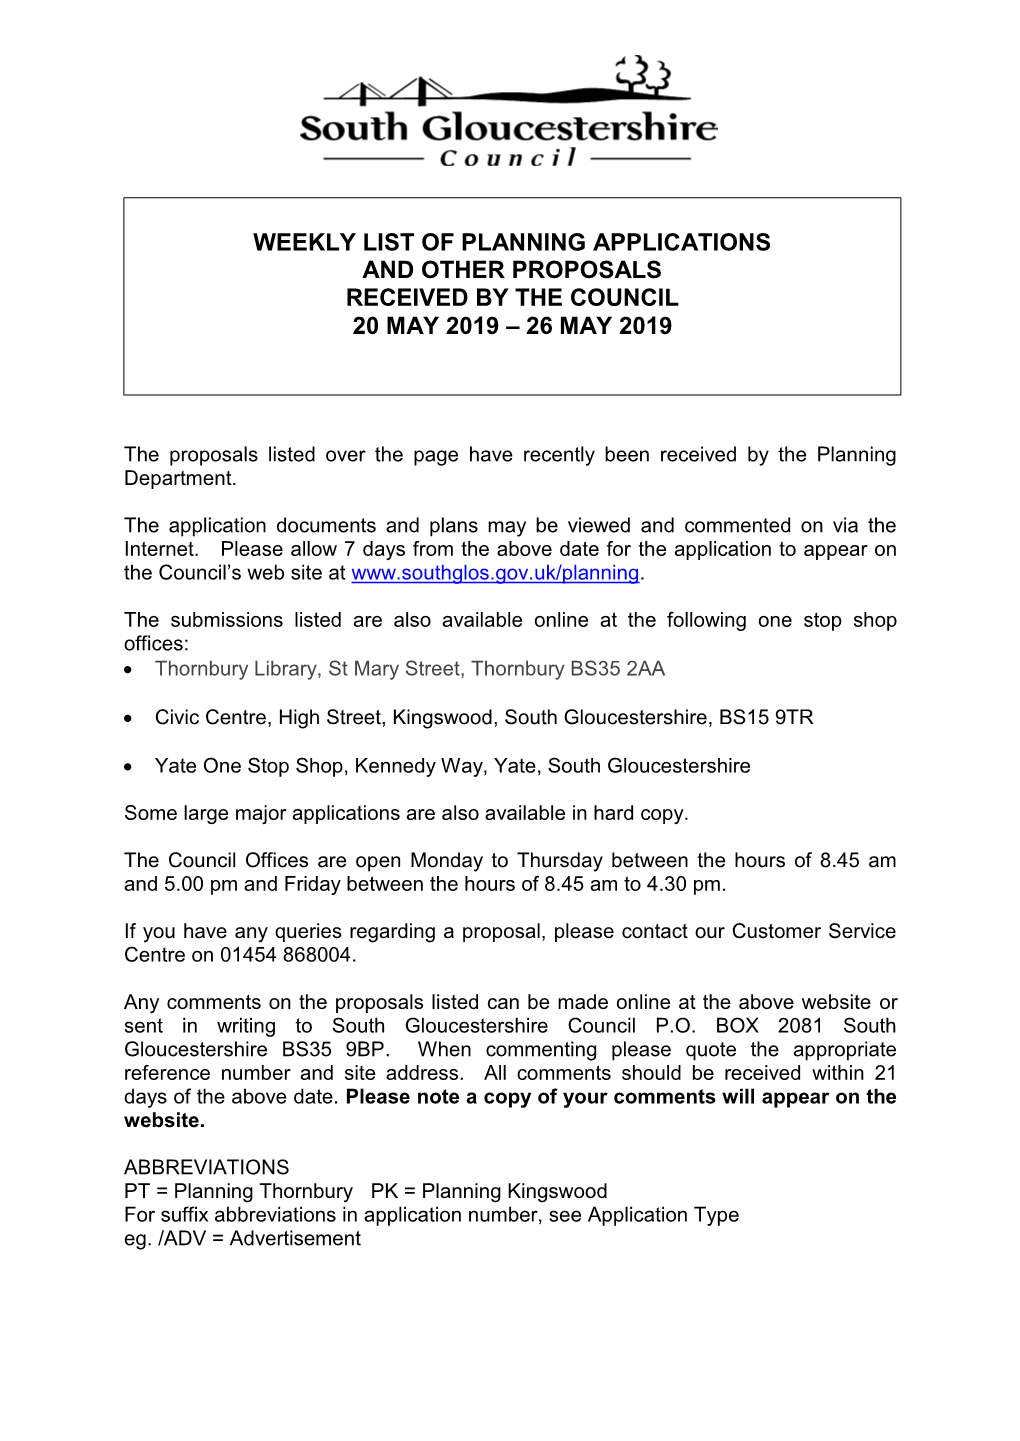 Weekly List of Planning Applications and Other Proposals Received by the Council 20 May 2019 – 26 May 2019